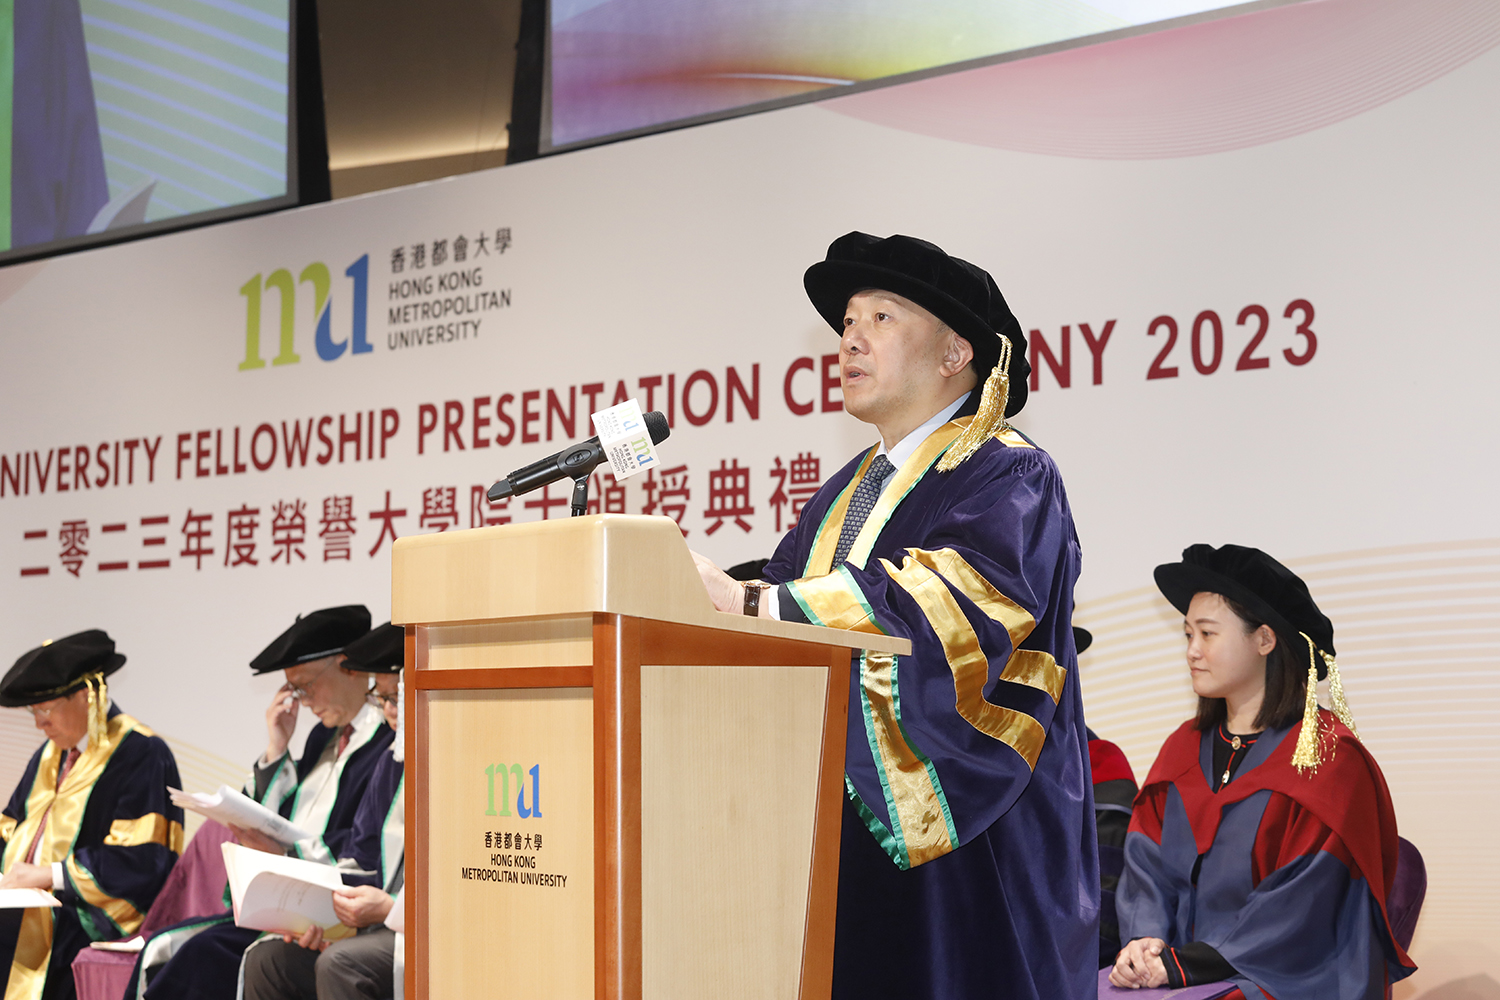 Addressing the ceremony, Council Chairman Ir Dr Conrad Wong Tin-cheung commends the four Honorary University Fellowship recipients for their accomplishments in their respective fields and contribution to the betterment of society, as well as being highly valued role models for the young generations to look up to.